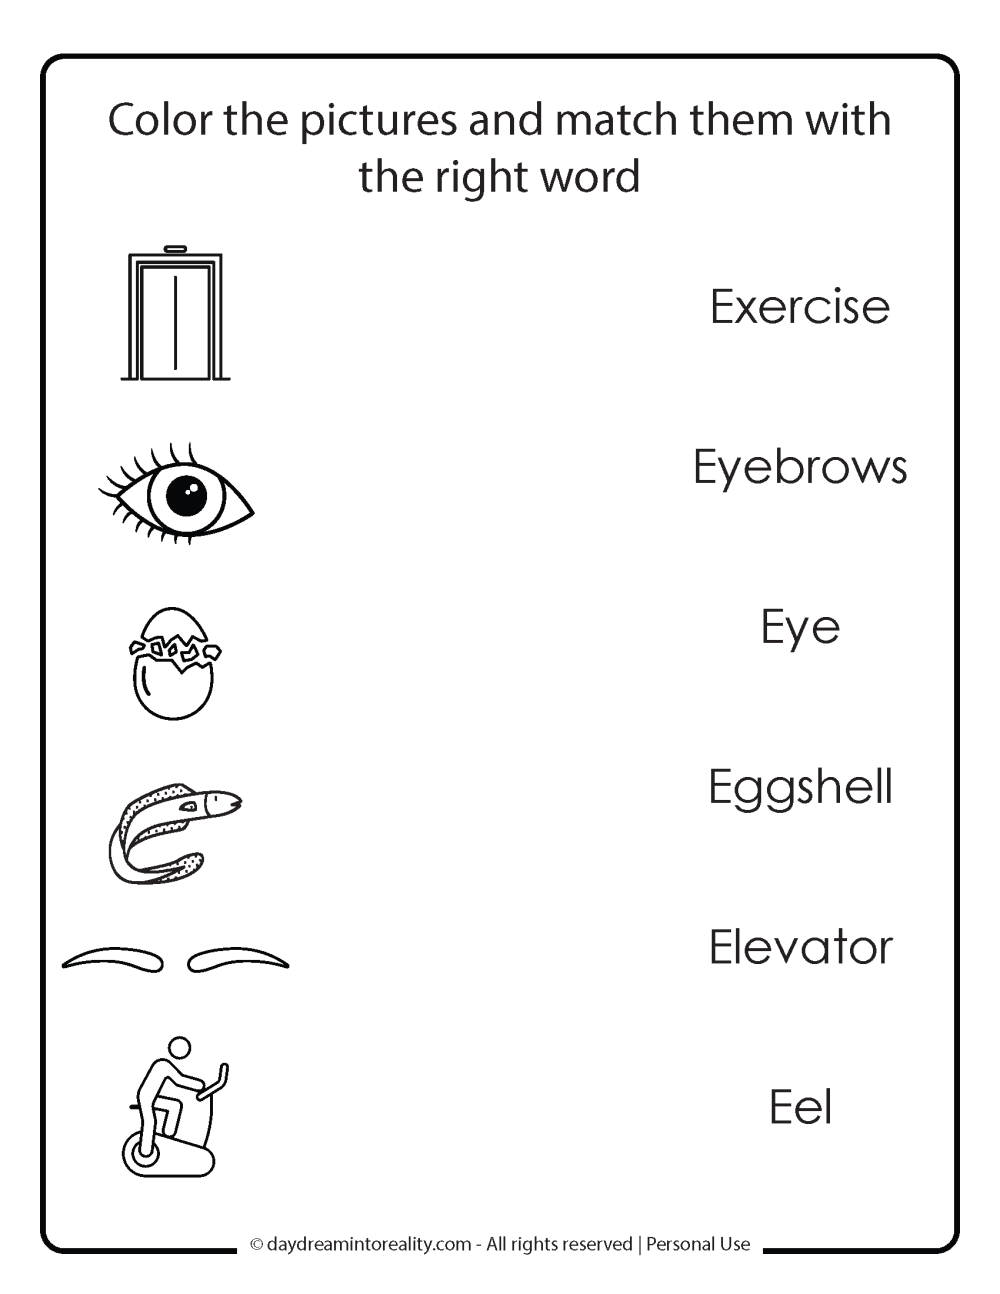 Letter E worksheet free printables. Find the word that matches the picture.